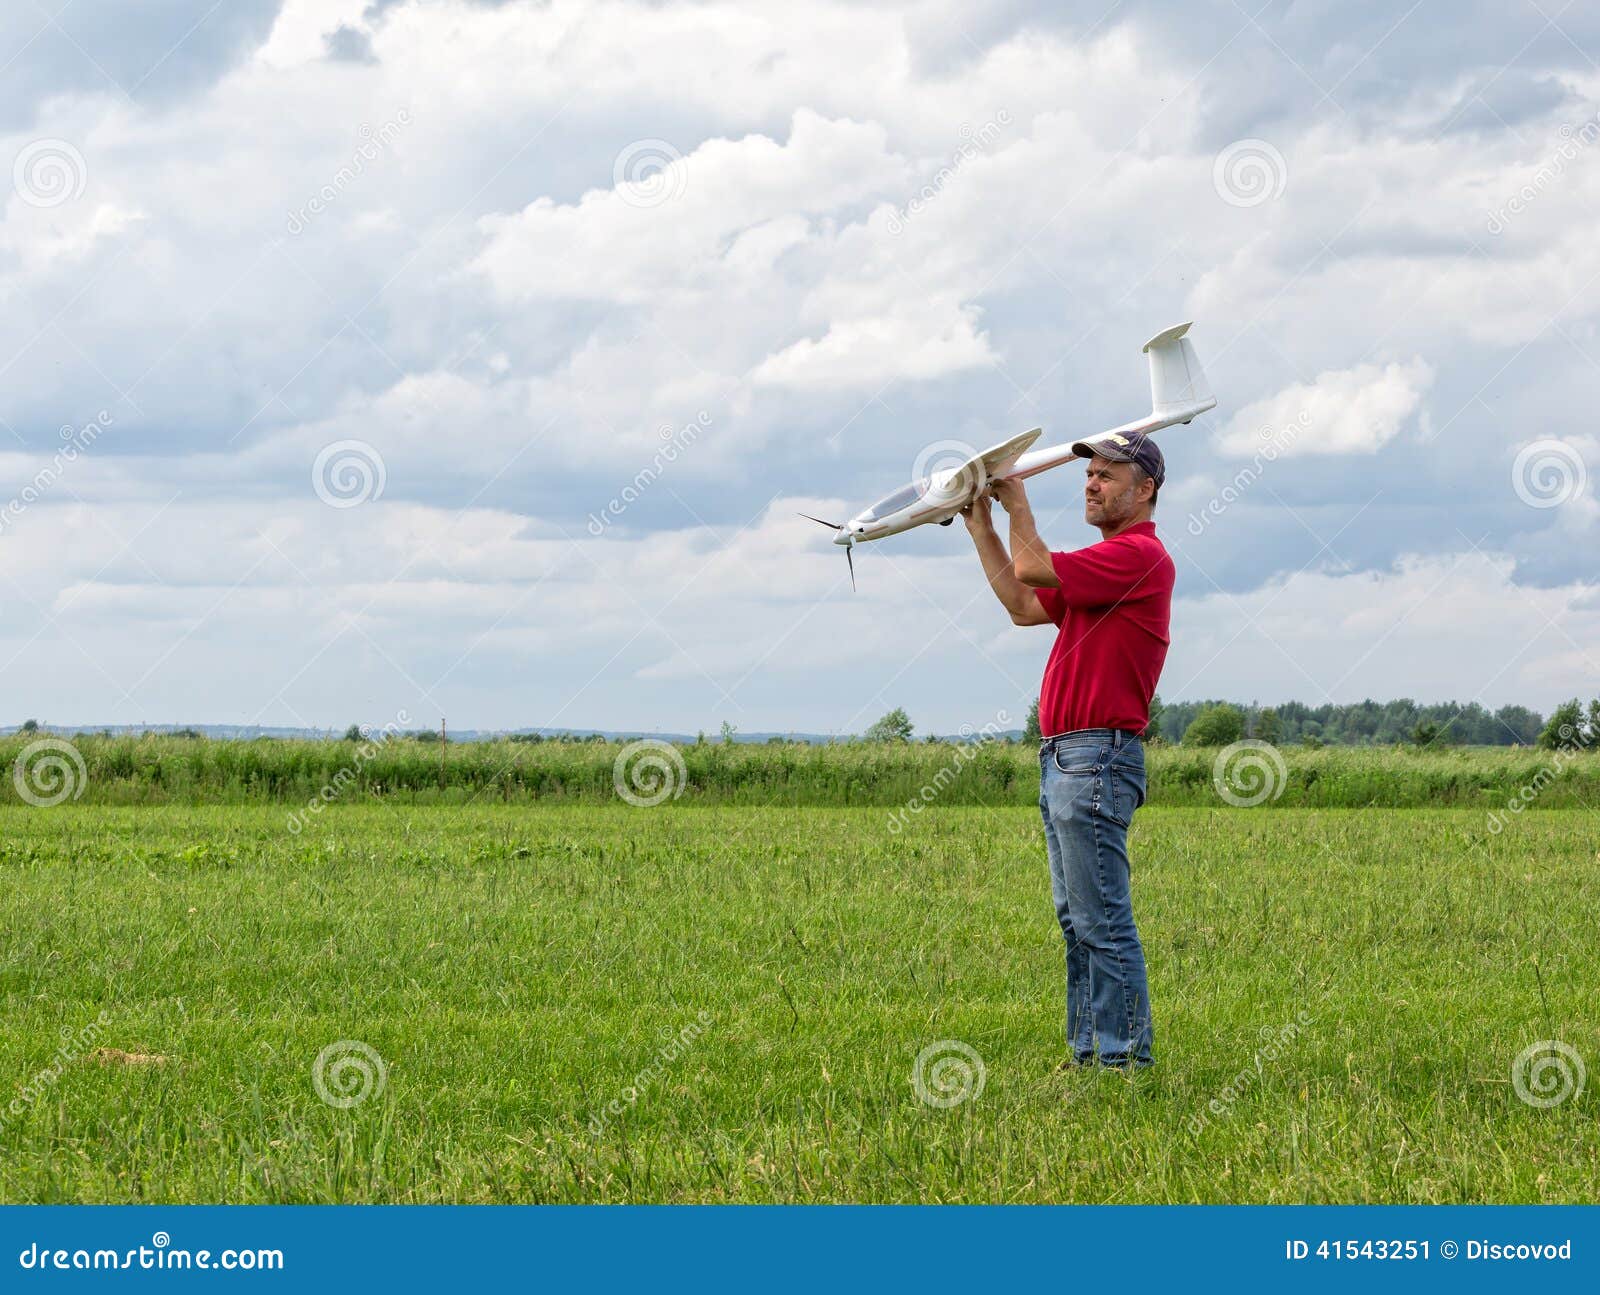 Man Launches into the Sky RC Glider Stock Image - Image of grass ...